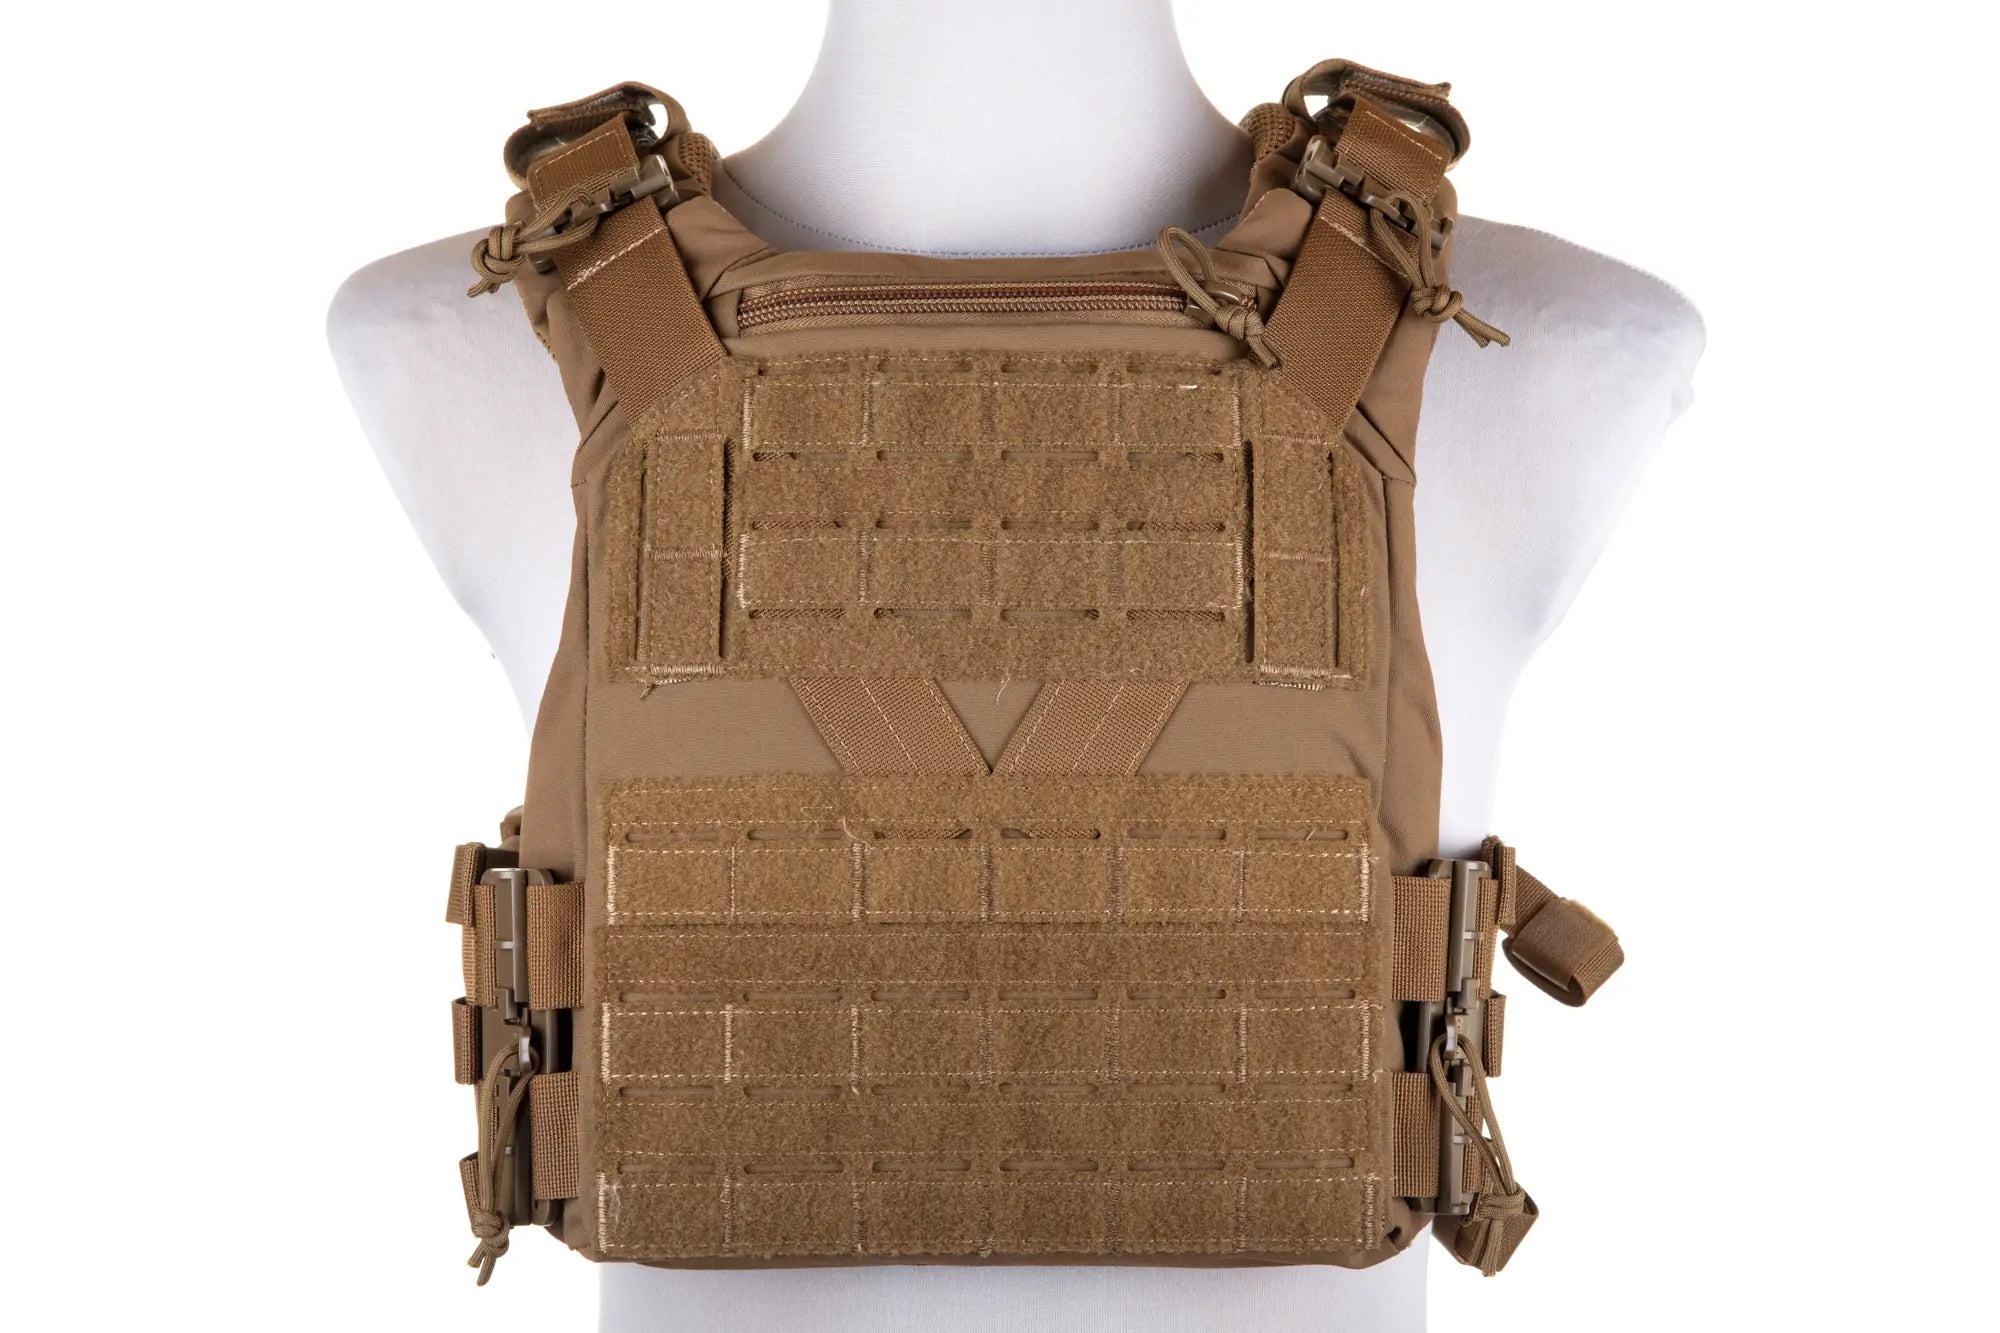 Wosport VE-83 Plate Carrier Tactical Vest Coyote Brown-7